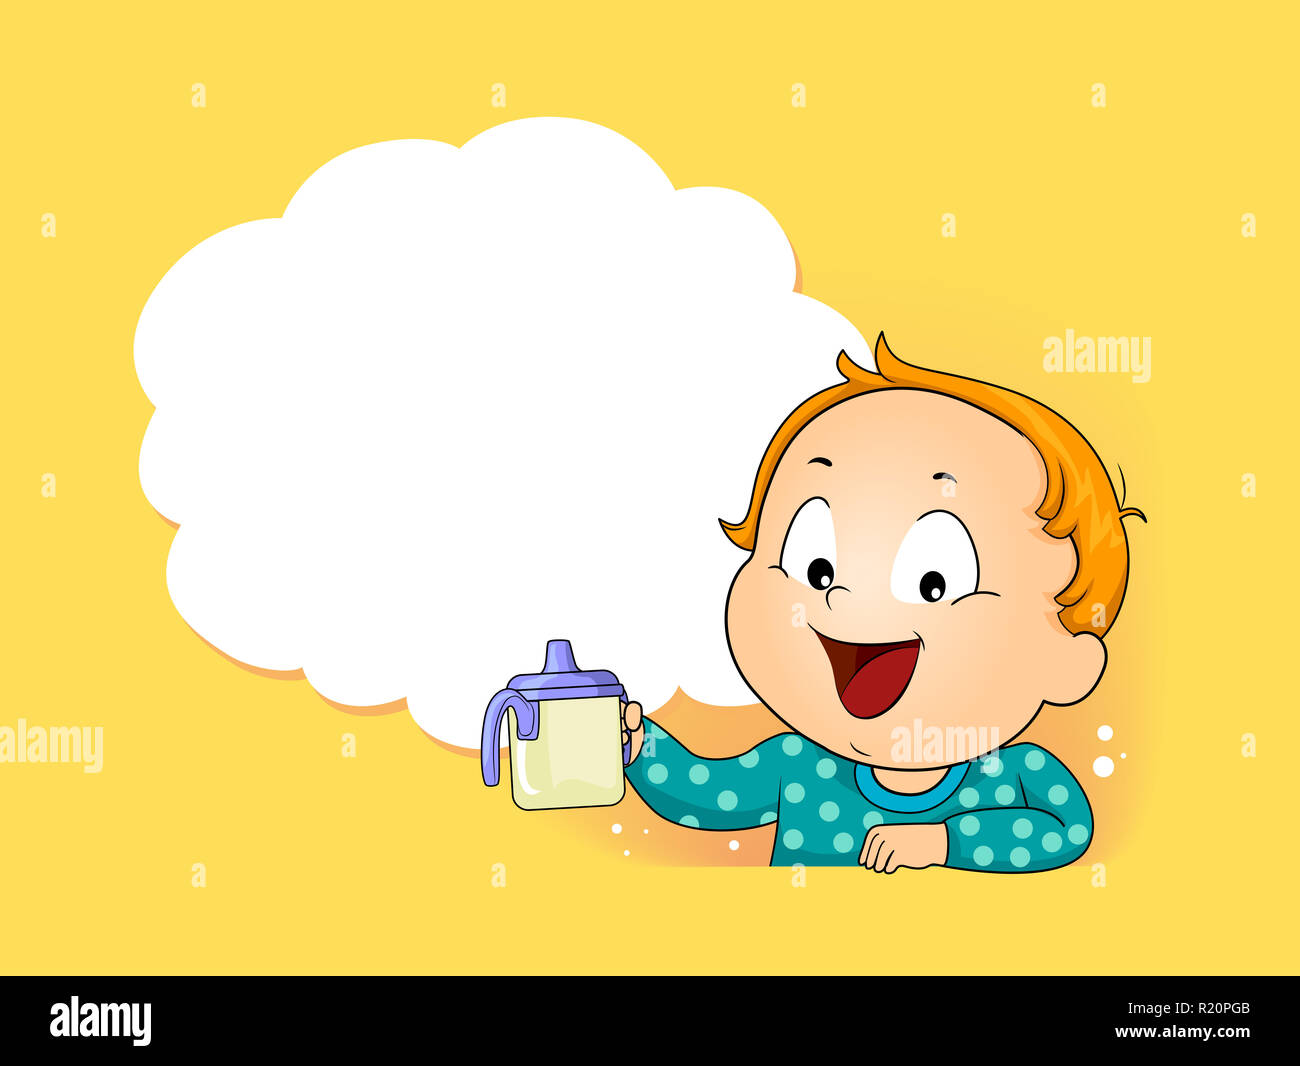 Colorful Illustration Featuring a Cute Little Boy Holding a Sippy Cup Standing Next to a Thought Cloud Stock Photo